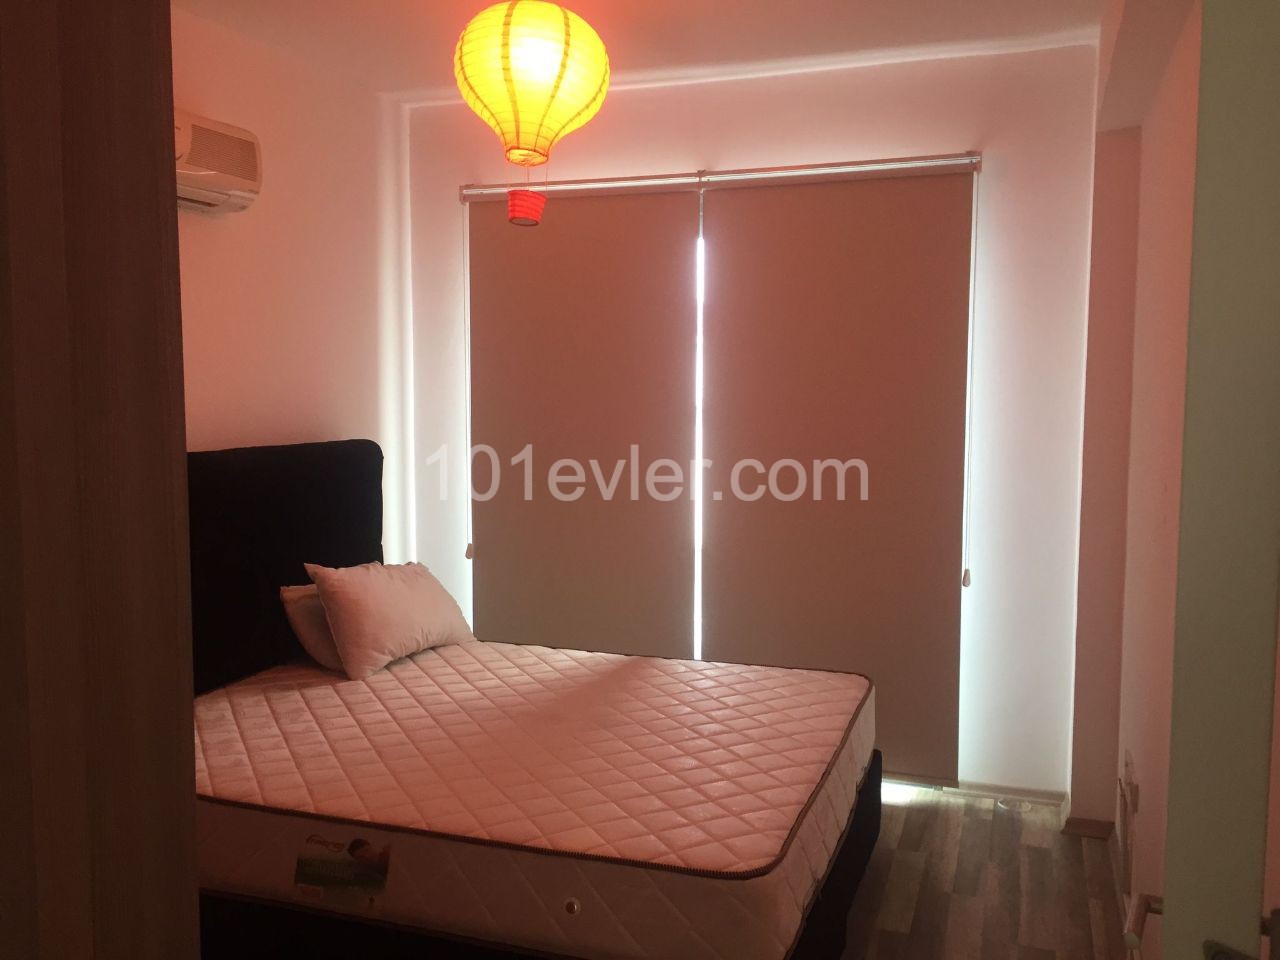 2+1 Furnished 1st Floor Flat for Rent in Nicosia Ortaköy Area 6+6 Payment 300 STG ** 